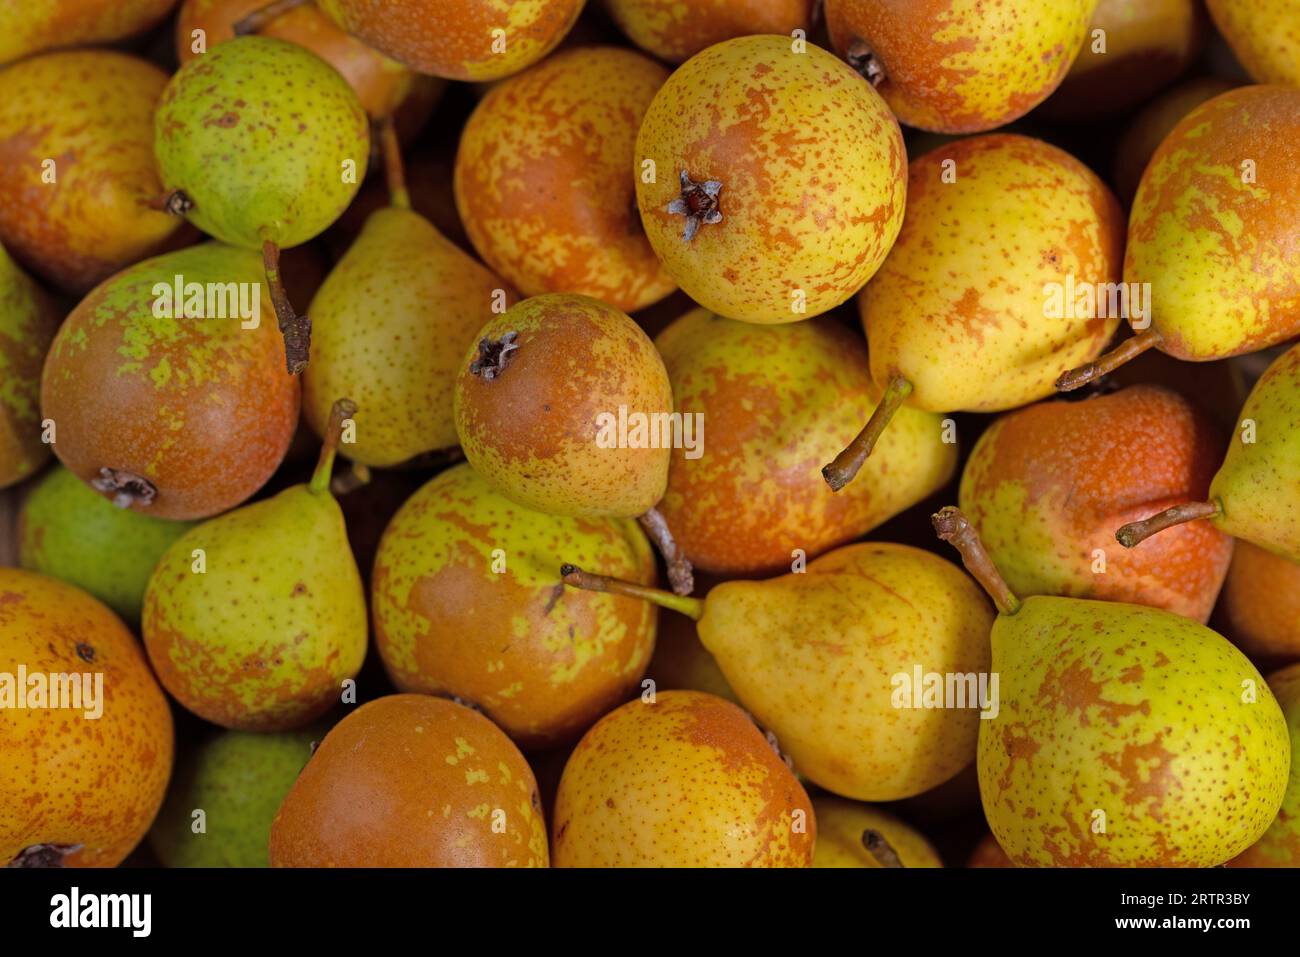 Ripe pears, Pyrus, freshly harvested Stock Photo